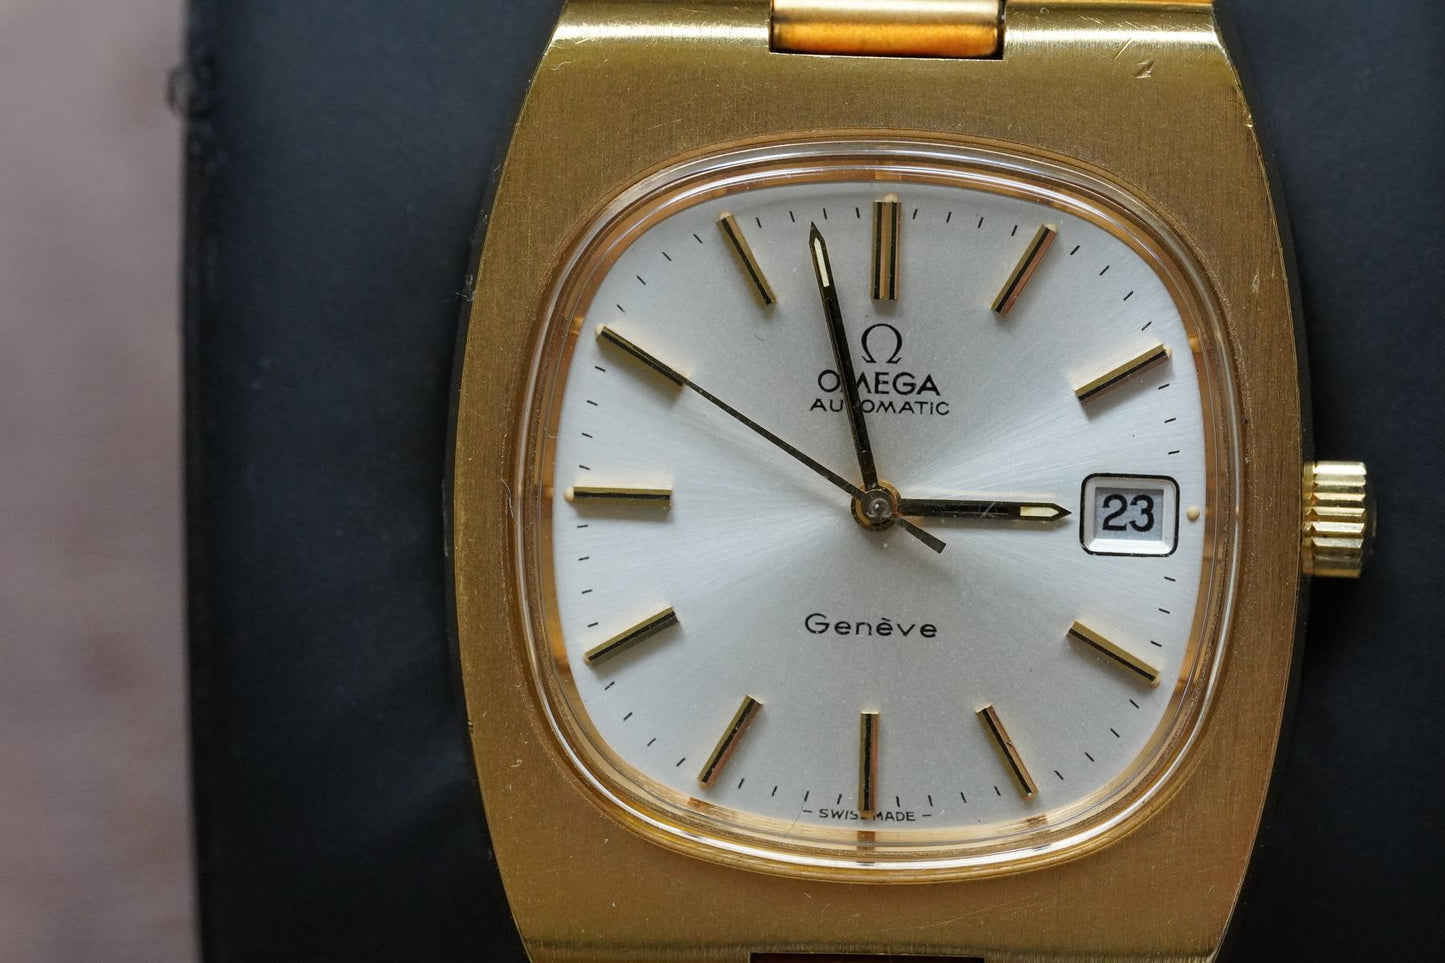 Vintage watch : Omega Genève automatic 166.0191 cal 1012